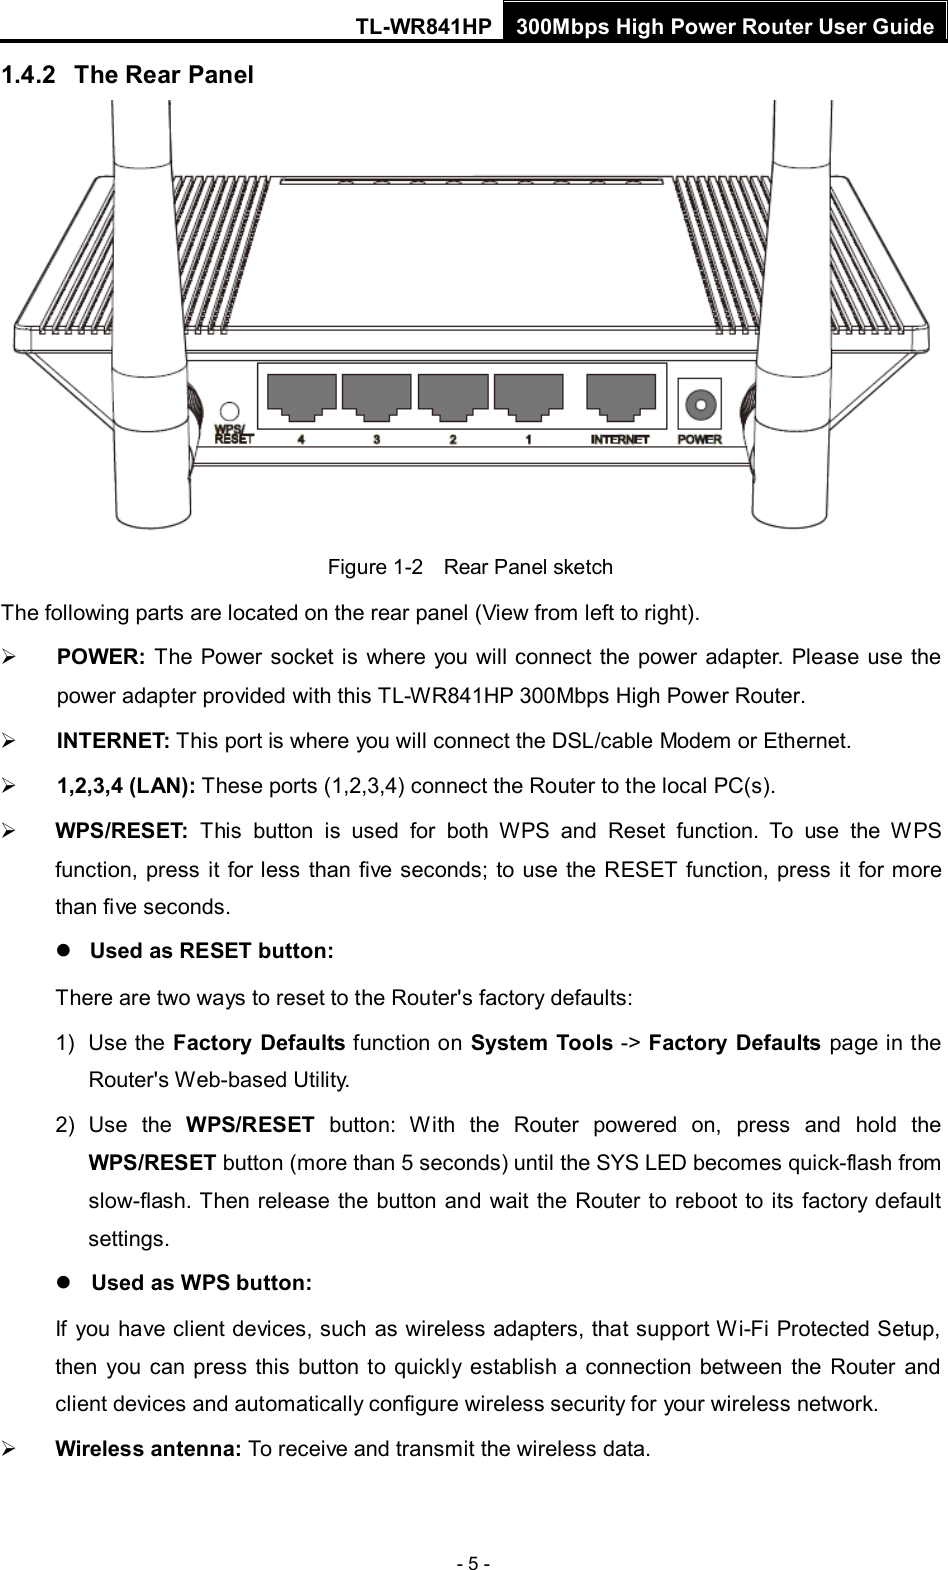 TL-WR841HP 300Mbps High Power Router User Guide  - 5 - 1.4.2 The Rear Panel  Figure 1-2    Rear Panel sketch The following parts are located on the rear panel (View from left to right).  POWER: The Power socket is where you will connect the power adapter.  Please use the power adapter provided with this TL-WR841HP 300Mbps High Power Router.  INTERNET: This port is where you will connect the DSL/cable Modem or Ethernet.  1,2,3,4 (LAN): These ports (1,2,3,4) connect the Router to the local PC(s).  WPS/RESET: This button is used for both WPS and Reset function. To use the WPS function, press it for less than five seconds; to use the RESET function, press it for more than five seconds.    Used as RESET button: There are two ways to reset to the Router&apos;s factory defaults: 1) Use the Factory Defaults function on System Tools -&gt; Factory Defaults page in the Router&apos;s Web-based Utility. 2) Use the WPS/RESET button:  With the  Router powered on, press and hold the WPS/RESET button (more than 5 seconds) until the SYS LED becomes quick-flash from slow-flash. Then release the button and wait the  Router to reboot to its factory default settings.  Used as WPS button: If you have client devices, such as wireless adapters, that support Wi-Fi Protected Setup, then you can press this button to quickly establish a connection between the Router and client devices and automatically configure wireless security for your wireless network.  Wireless antenna: To receive and transmit the wireless data. 